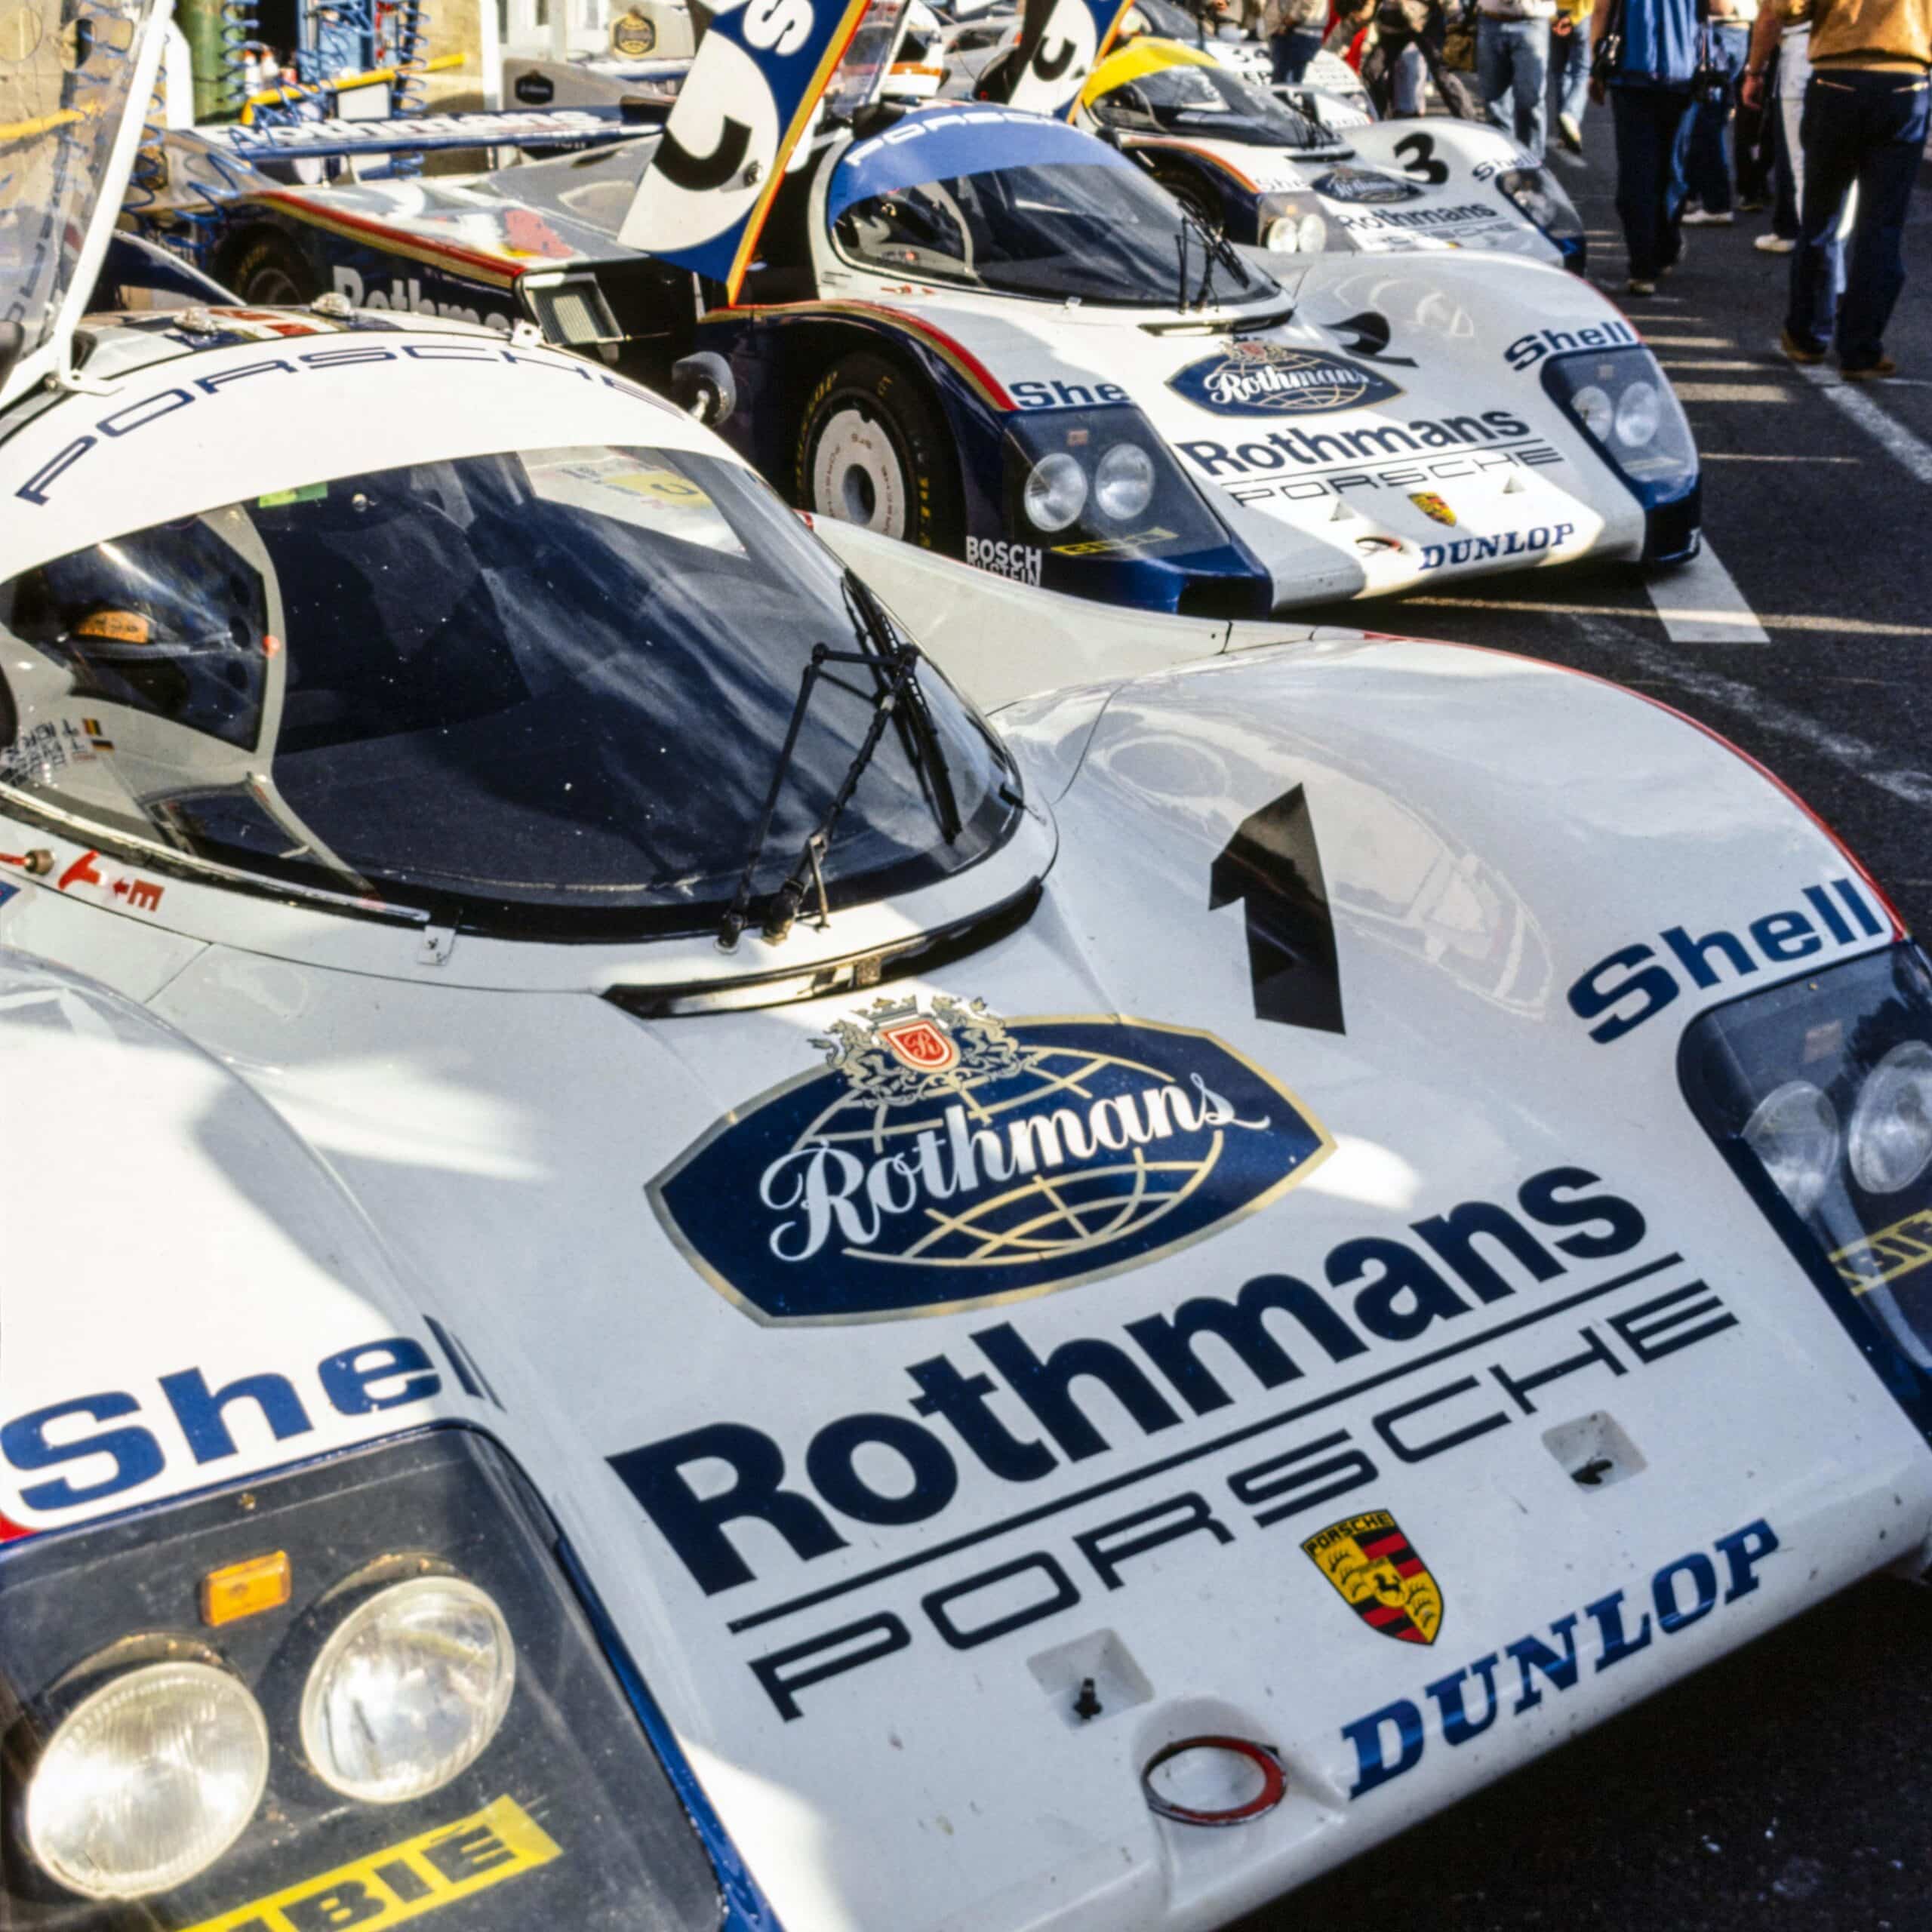 Rothmans Porsche squad in 1-2-3 pit formation before the start